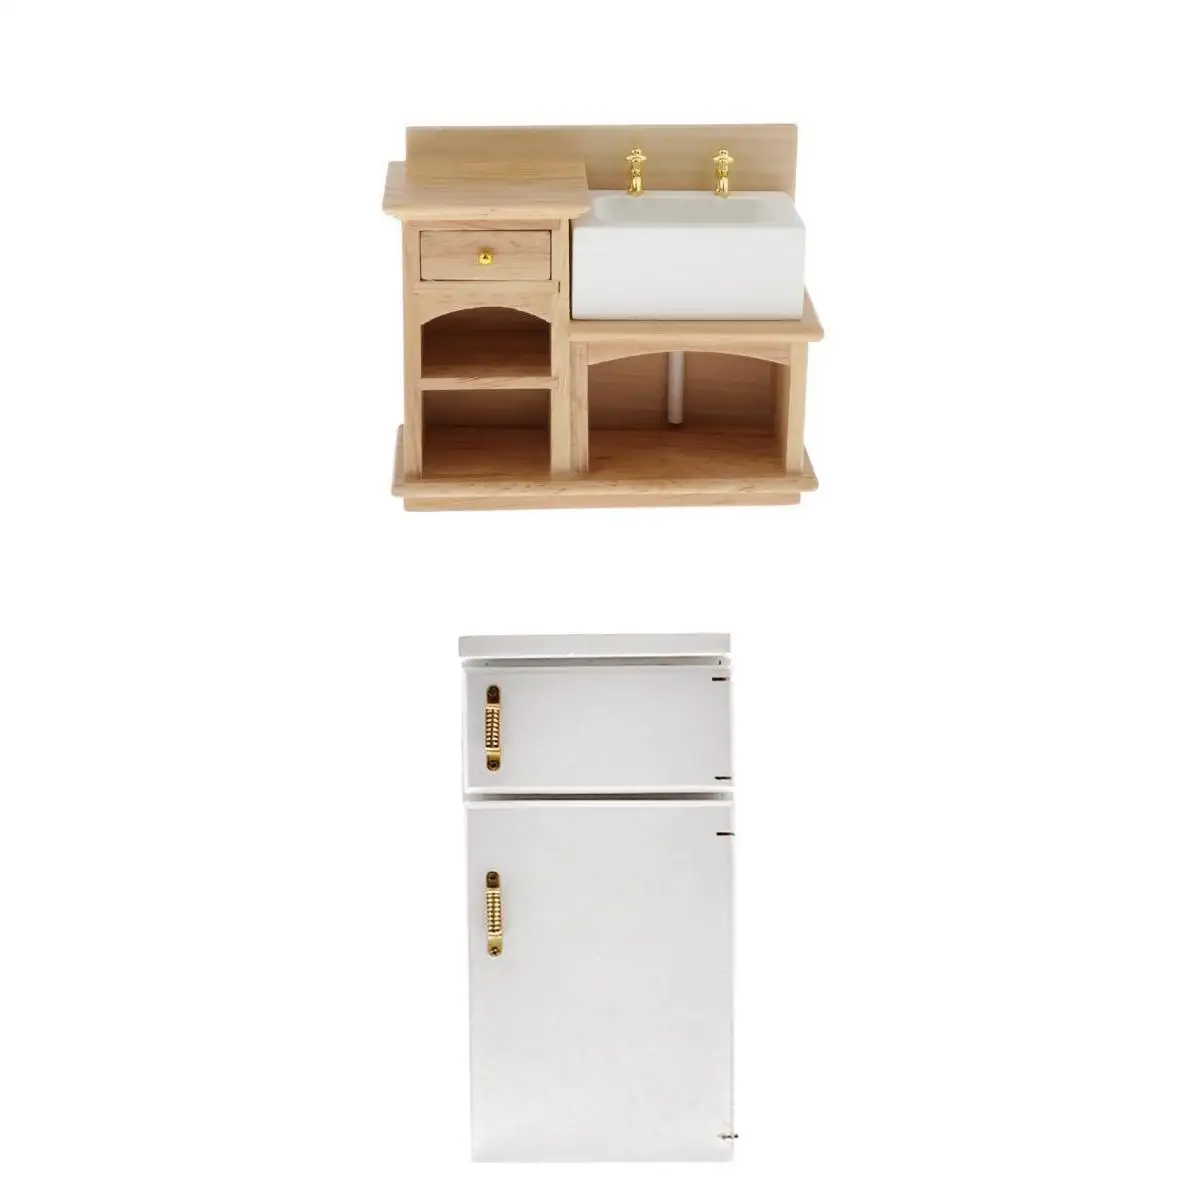  Mini Dollhouse Refrigerator Wooden Compact Dollhouse Furniture Mini Refrigerator and Wash Basin Sink for Toddler Dollhouse 